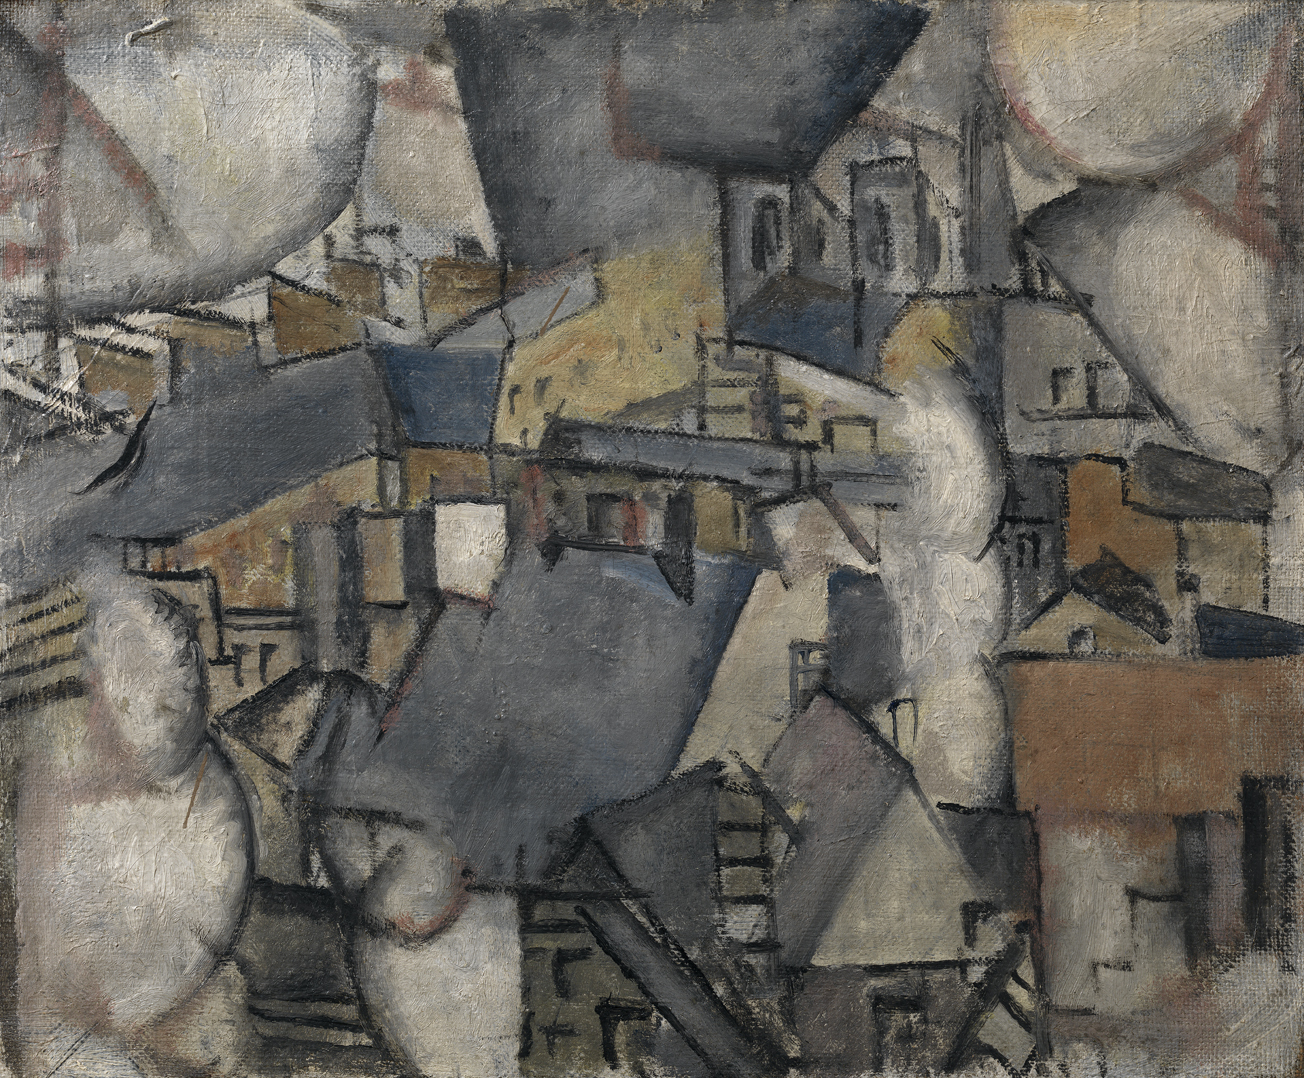 Fernand Léger
Smoke over Rooftops, 1911
olio su tela
cm 47,50 x 54,90 x 0,00
Collezione privata
© Fernand Léger by SIAE 2014 